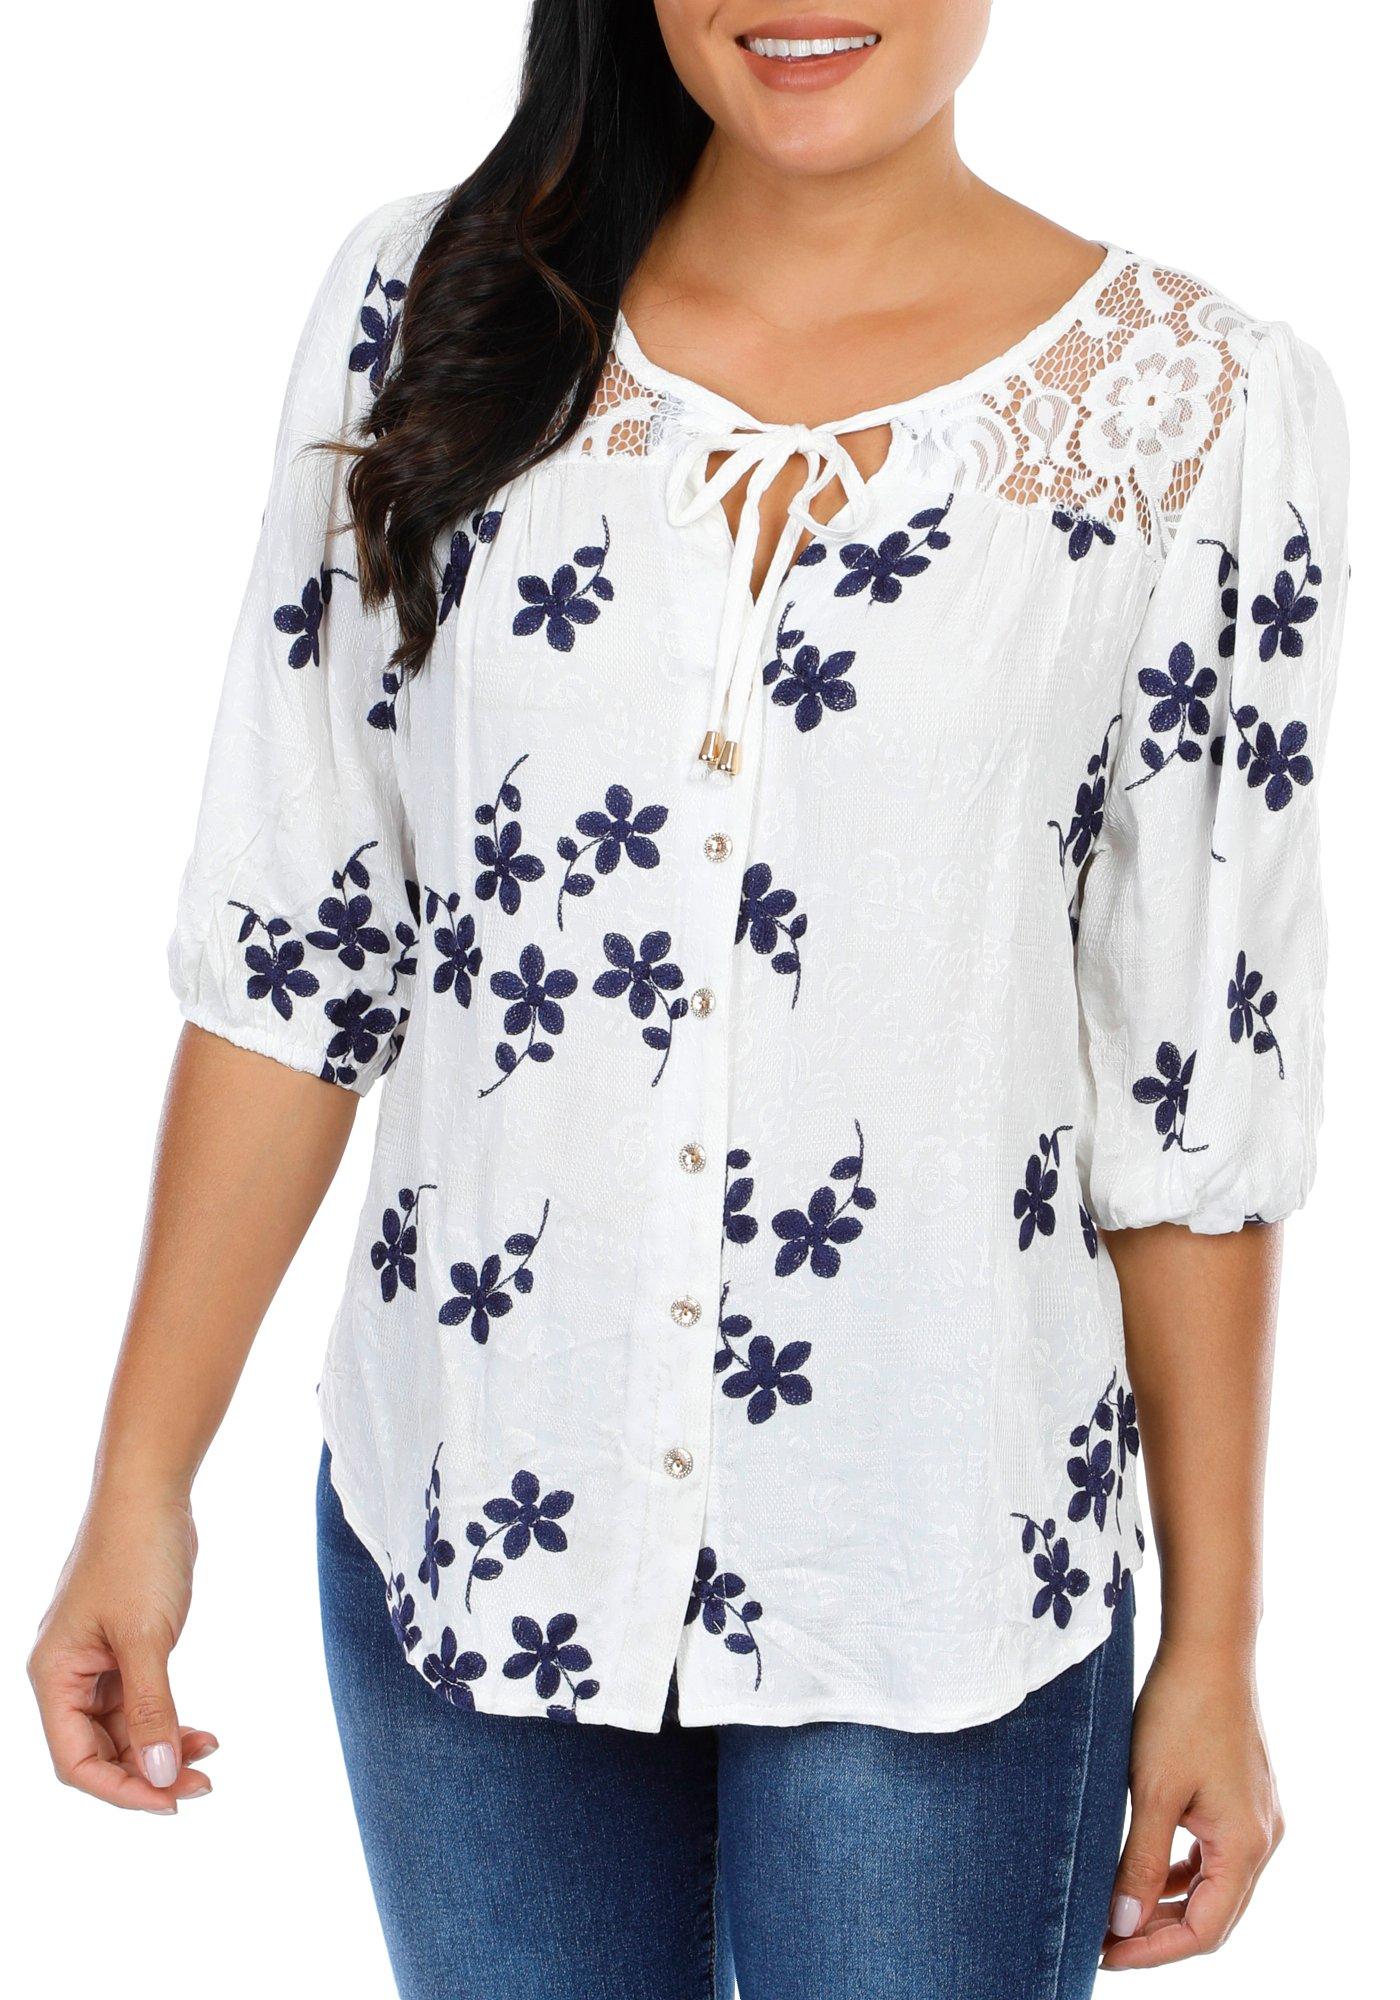 Women's Embroidered Floral Blouse